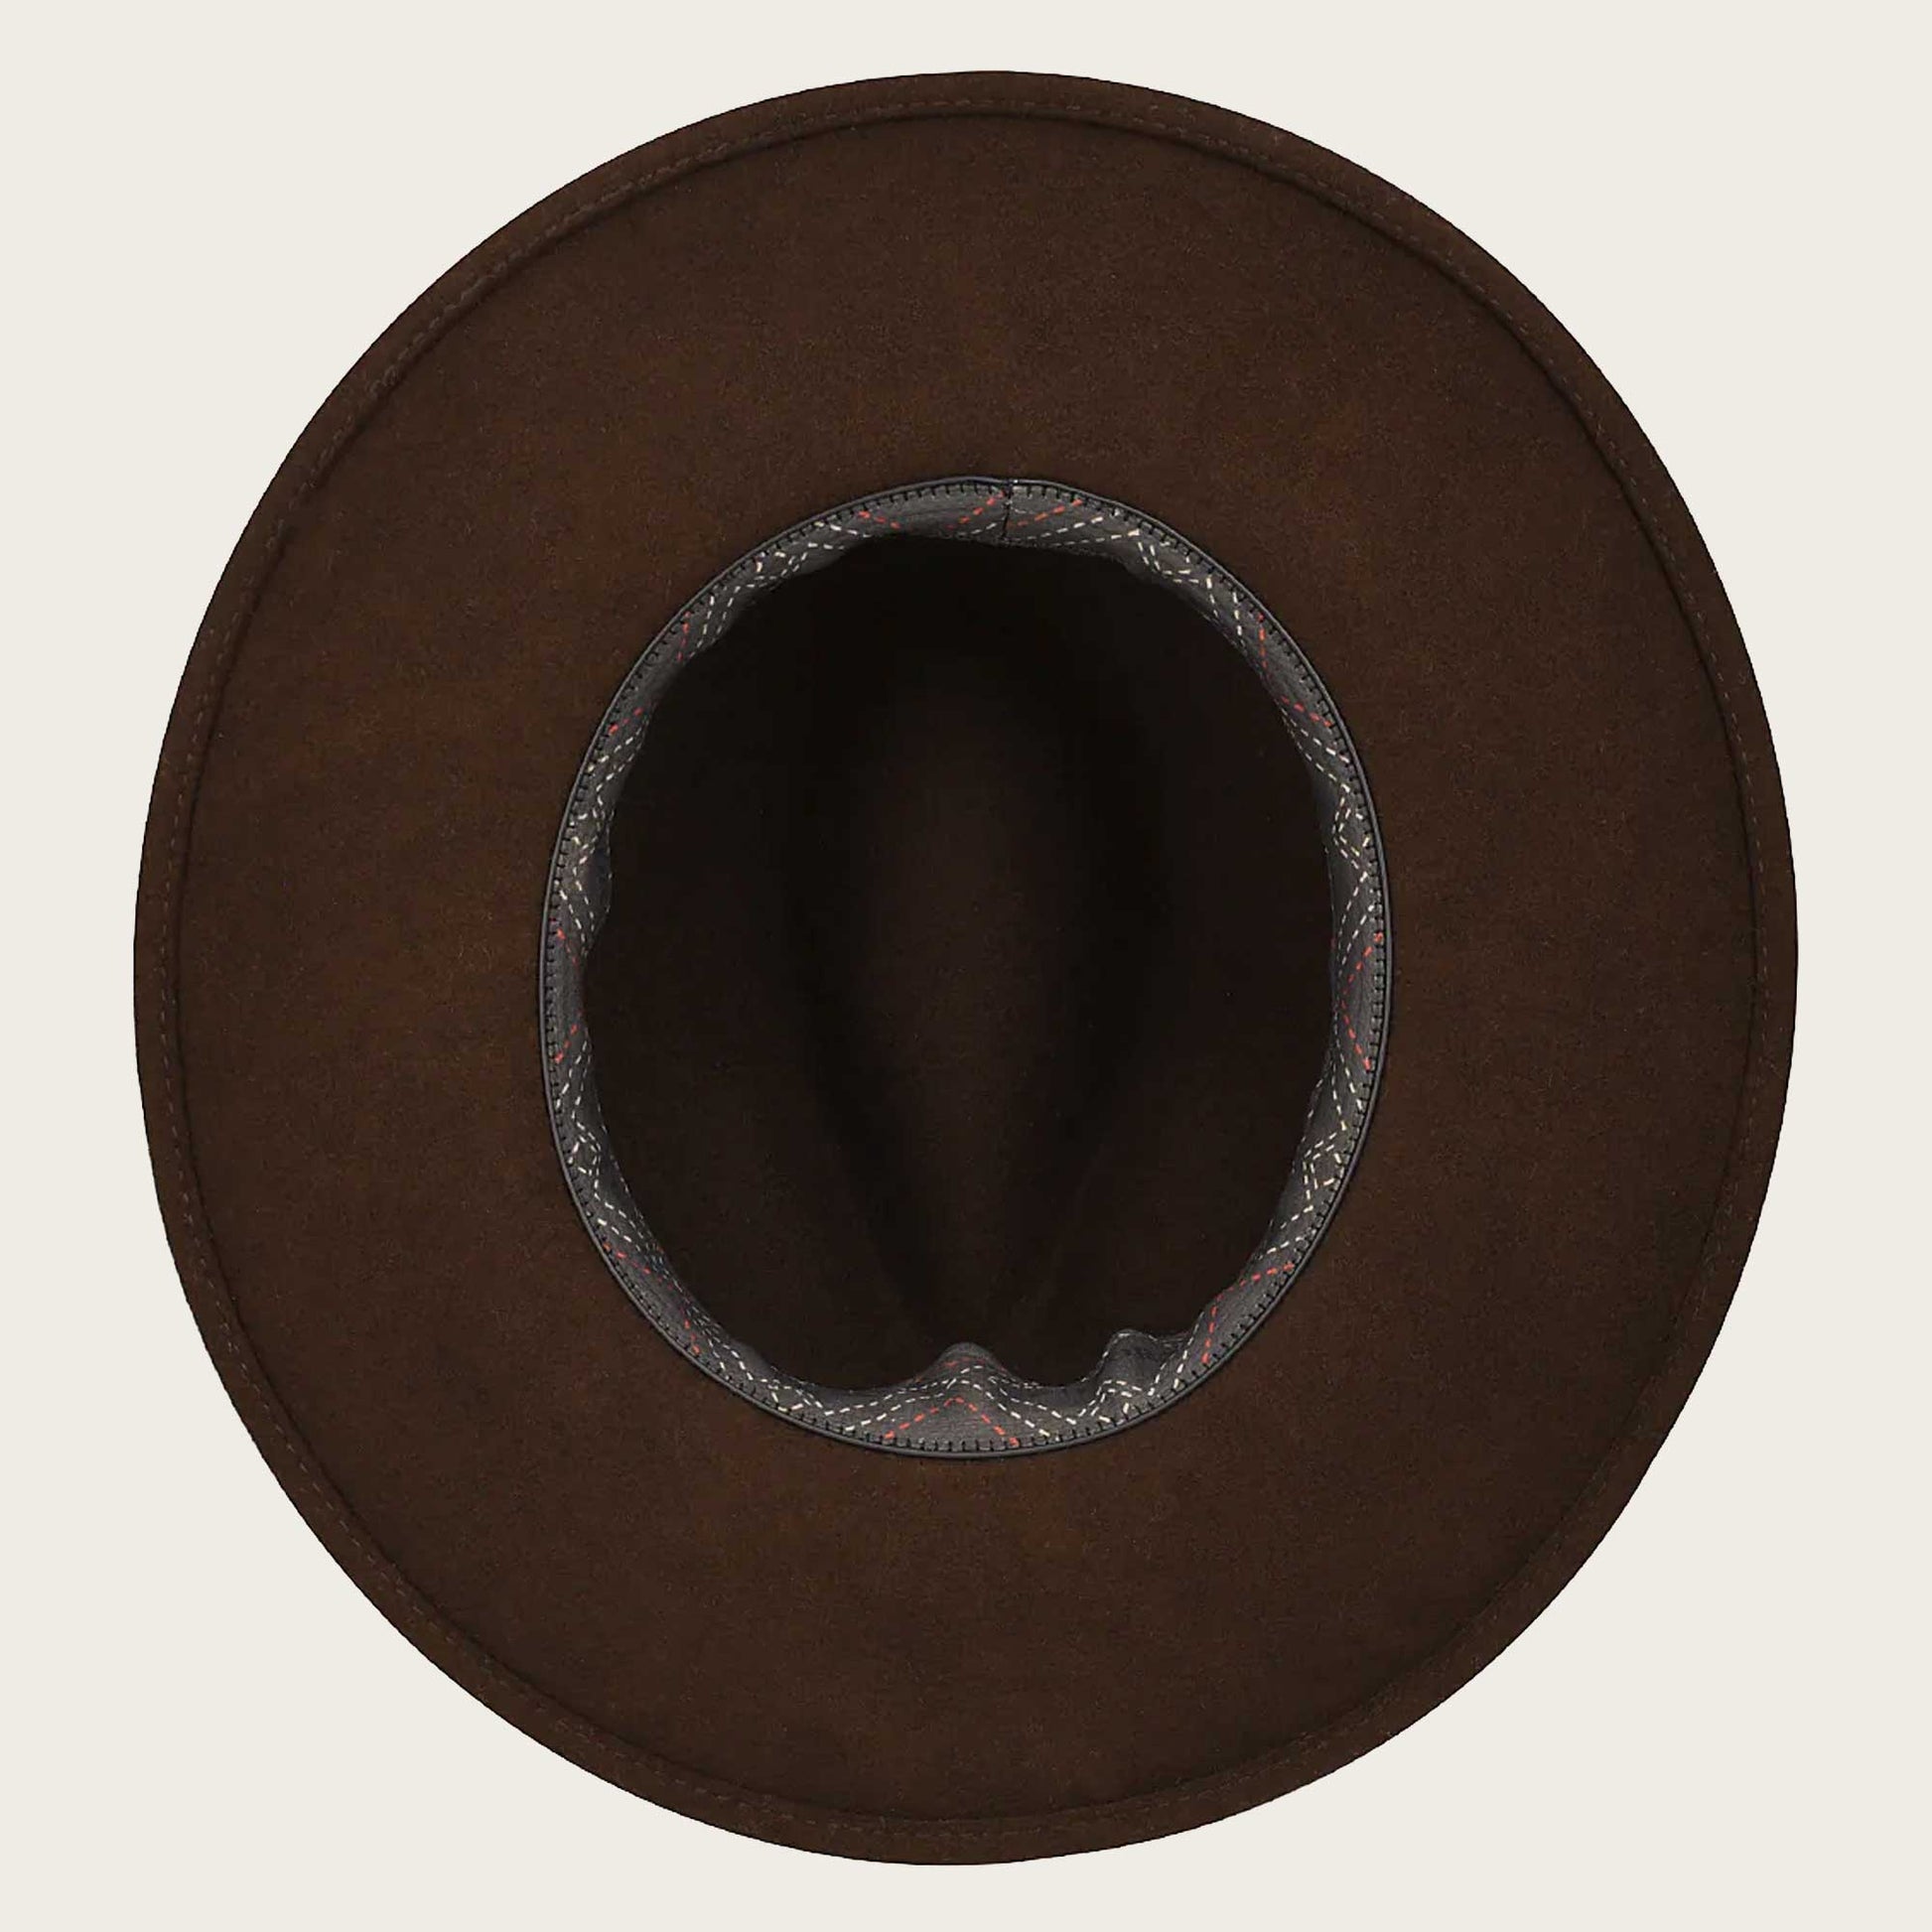 Brown hat with embroidered headband 4 